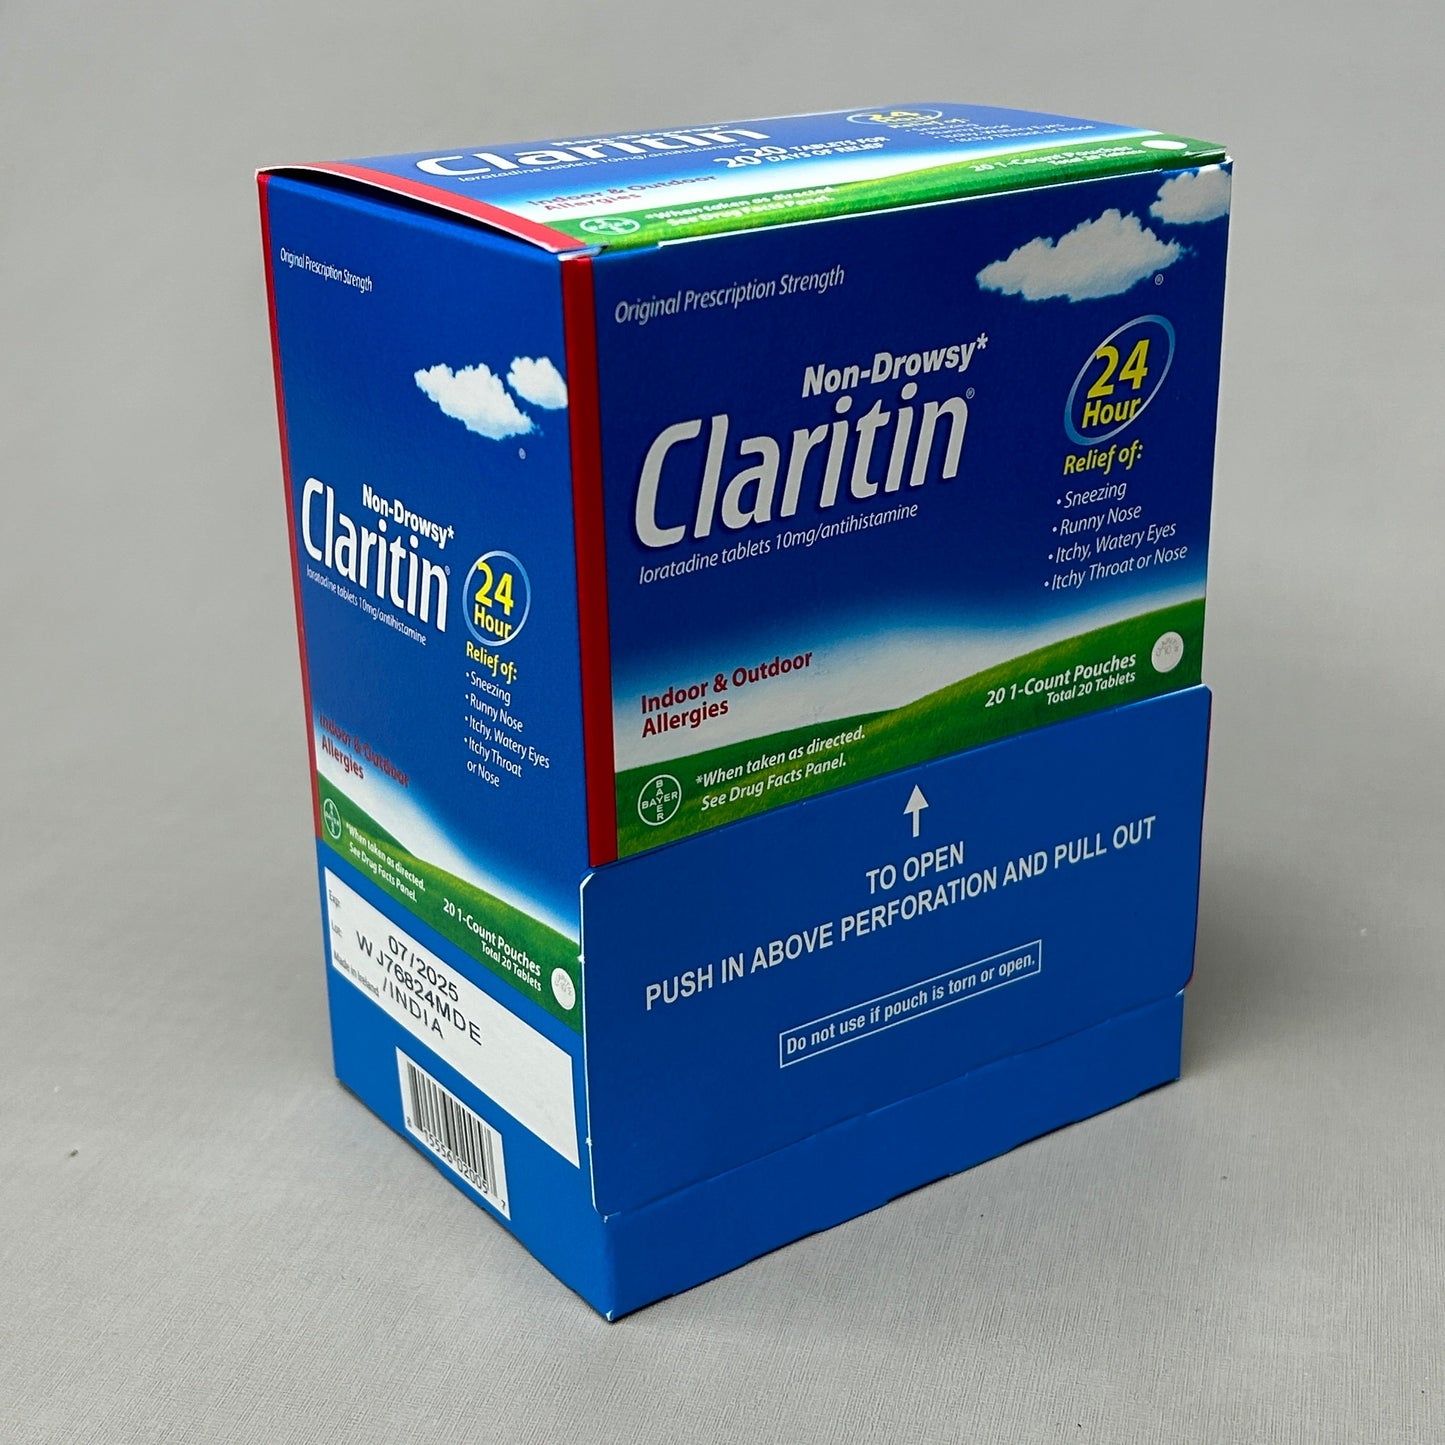 CLARITIN (2PK, 40 Total Tablets) Non-Drowsy Loratadine 24 Hour Allergies 07/25